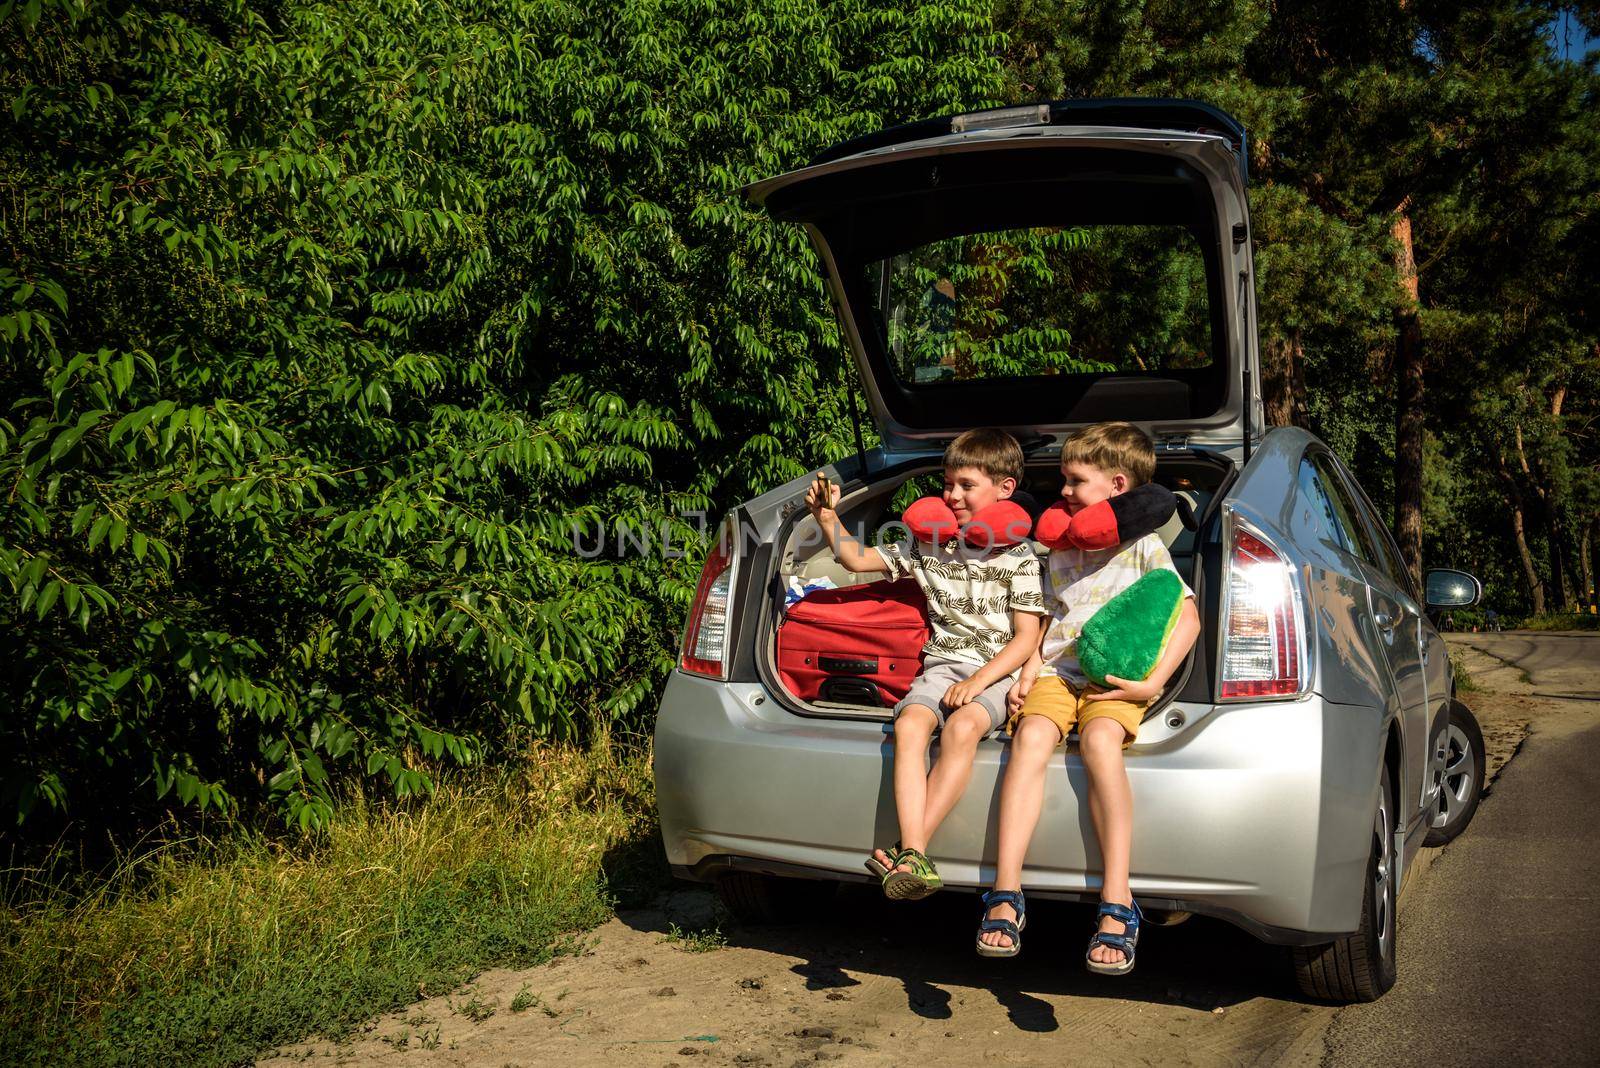 Two adorable little kids boy sitting in car trunk just before leaving for summer vacation. Sibling brothers making selfie on smartphone. Happy family going on long journey by Kobysh